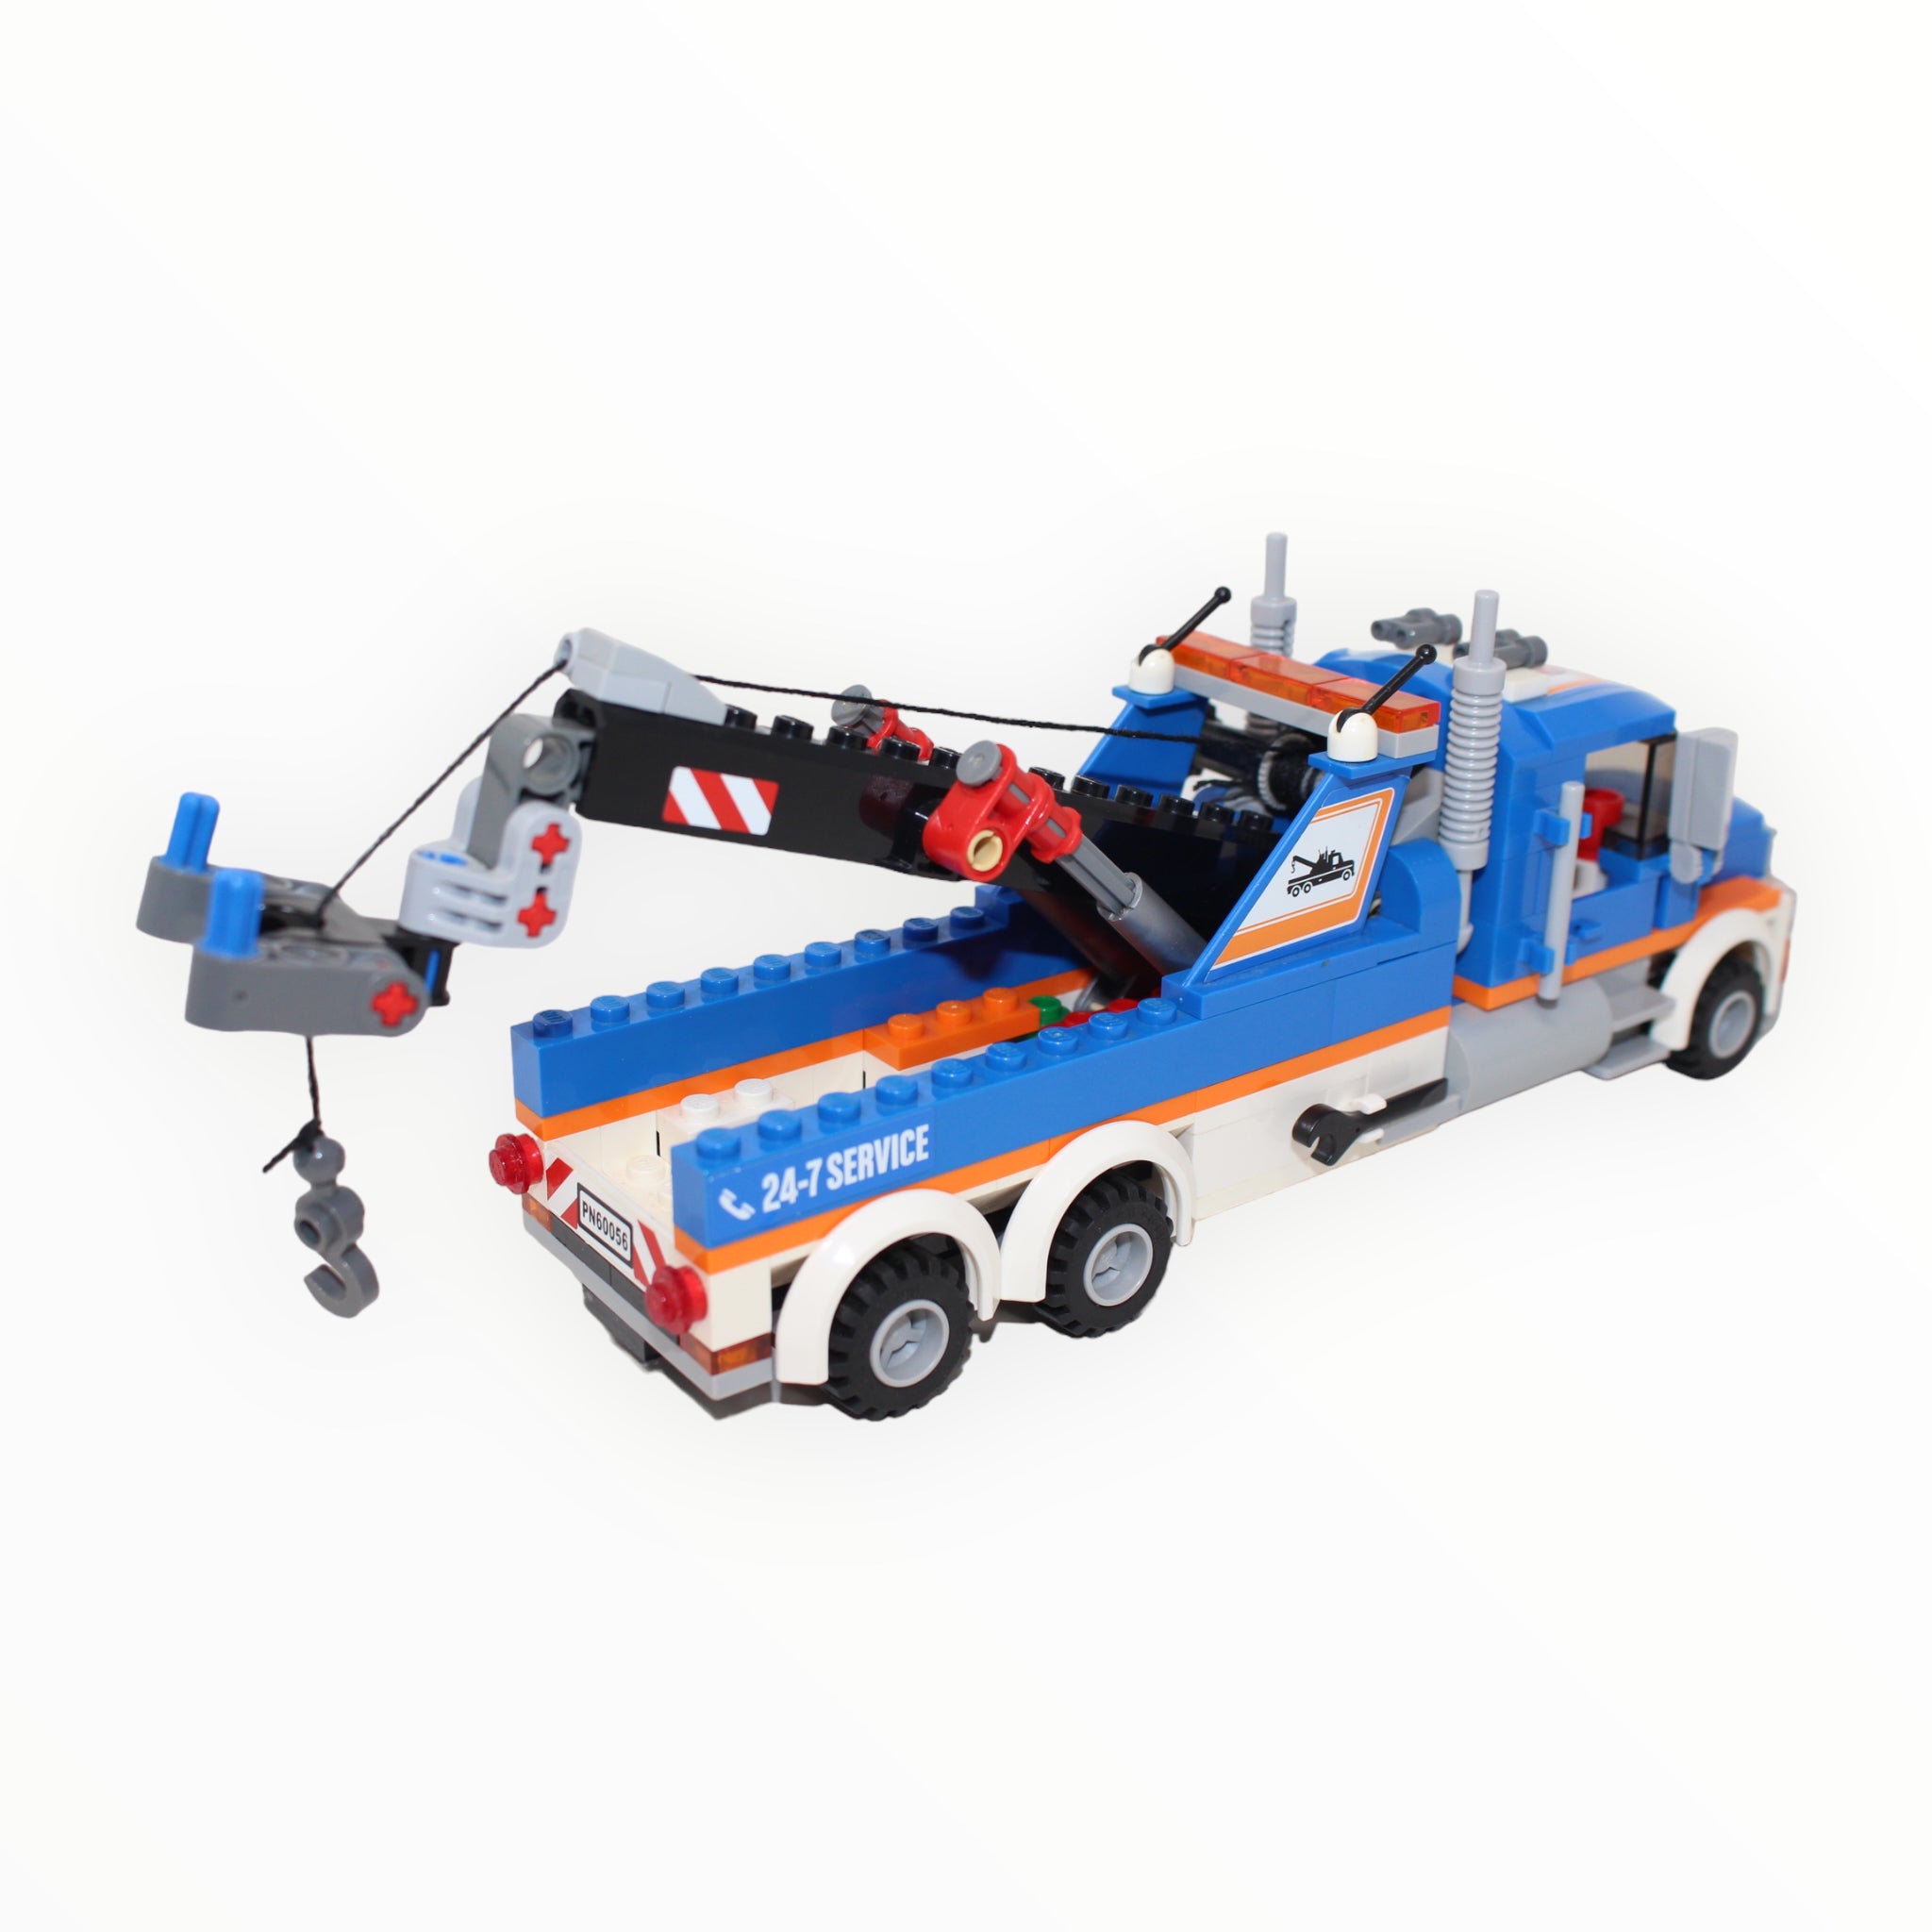 Used Set 60056 City Tow Truck